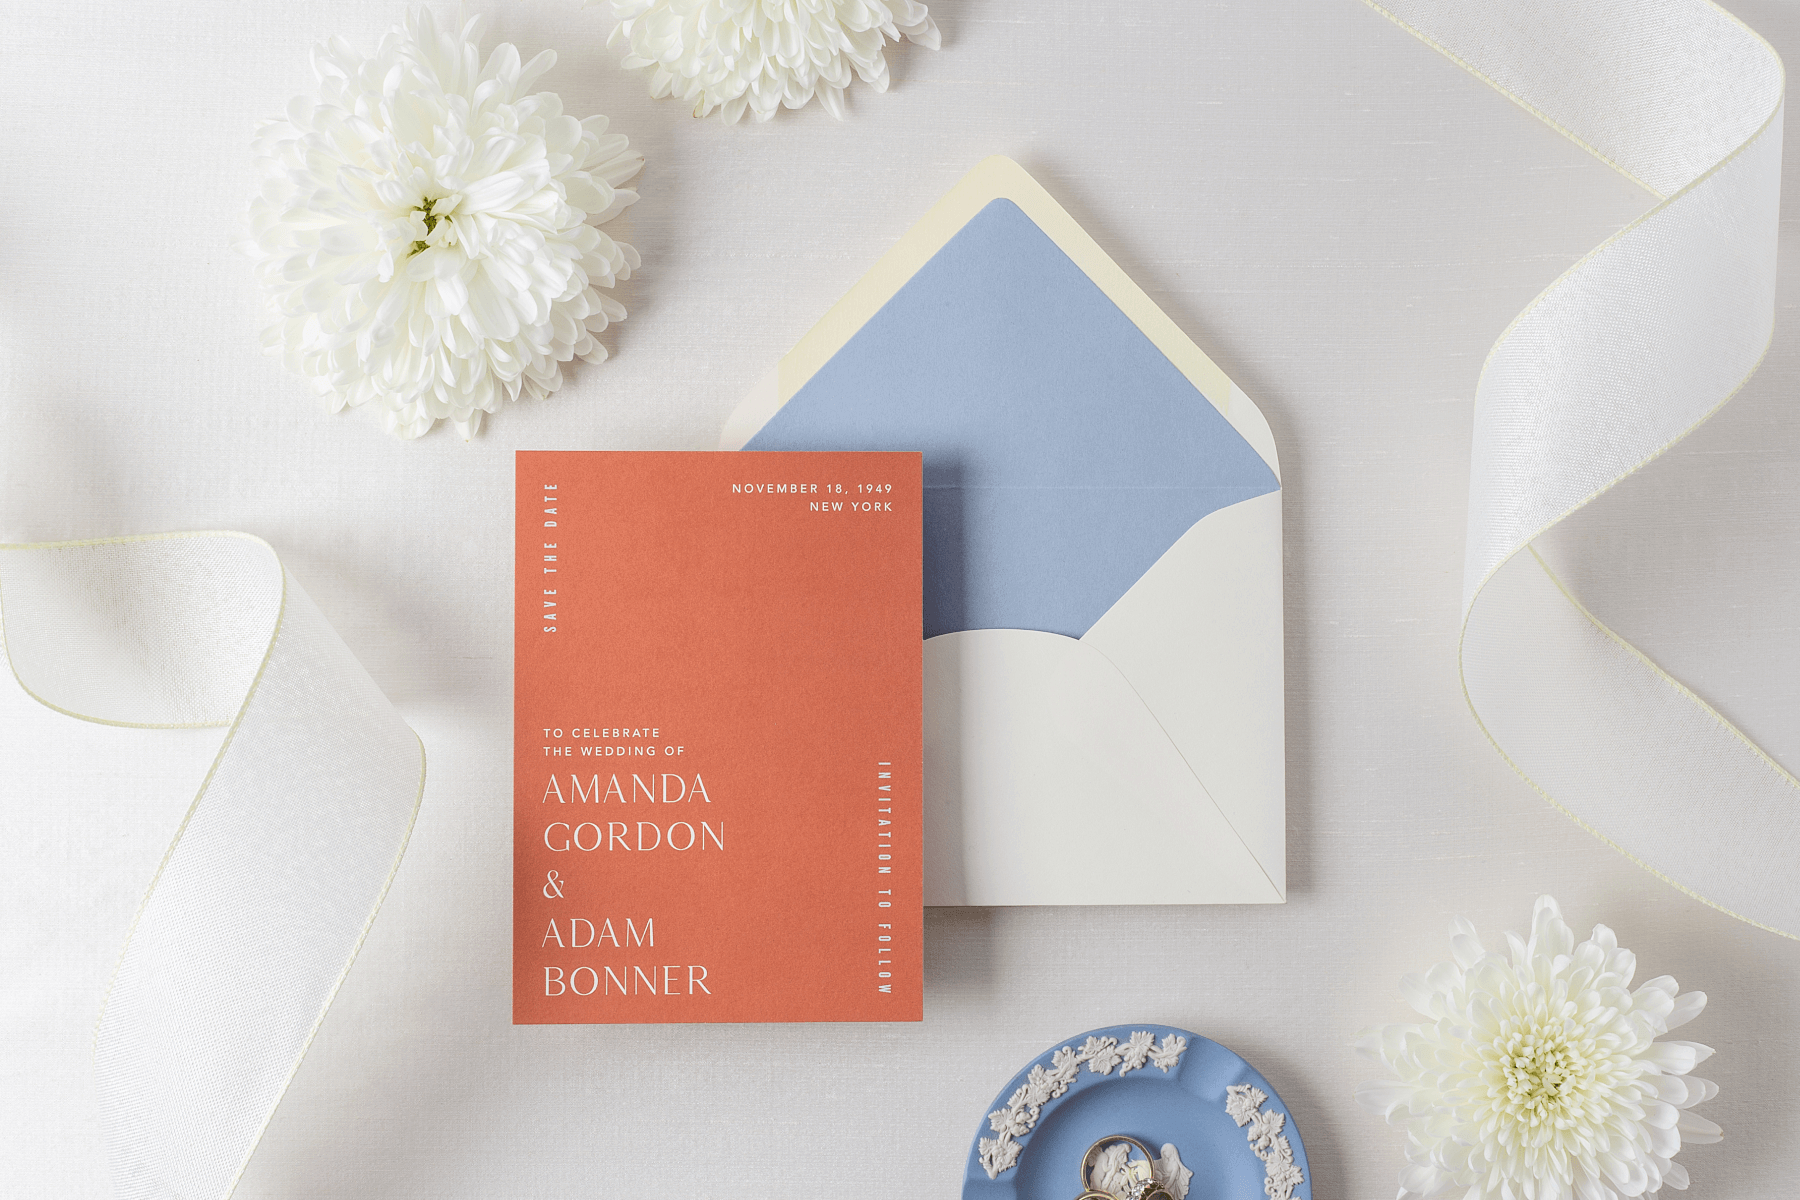 Printed rust-colored save the date invitation sits on top of an open white envelope with a light blue liner. Next to card are white flowers, strips of white ribbon, and a light blue Wedgwood dish holding two wedding rings. 